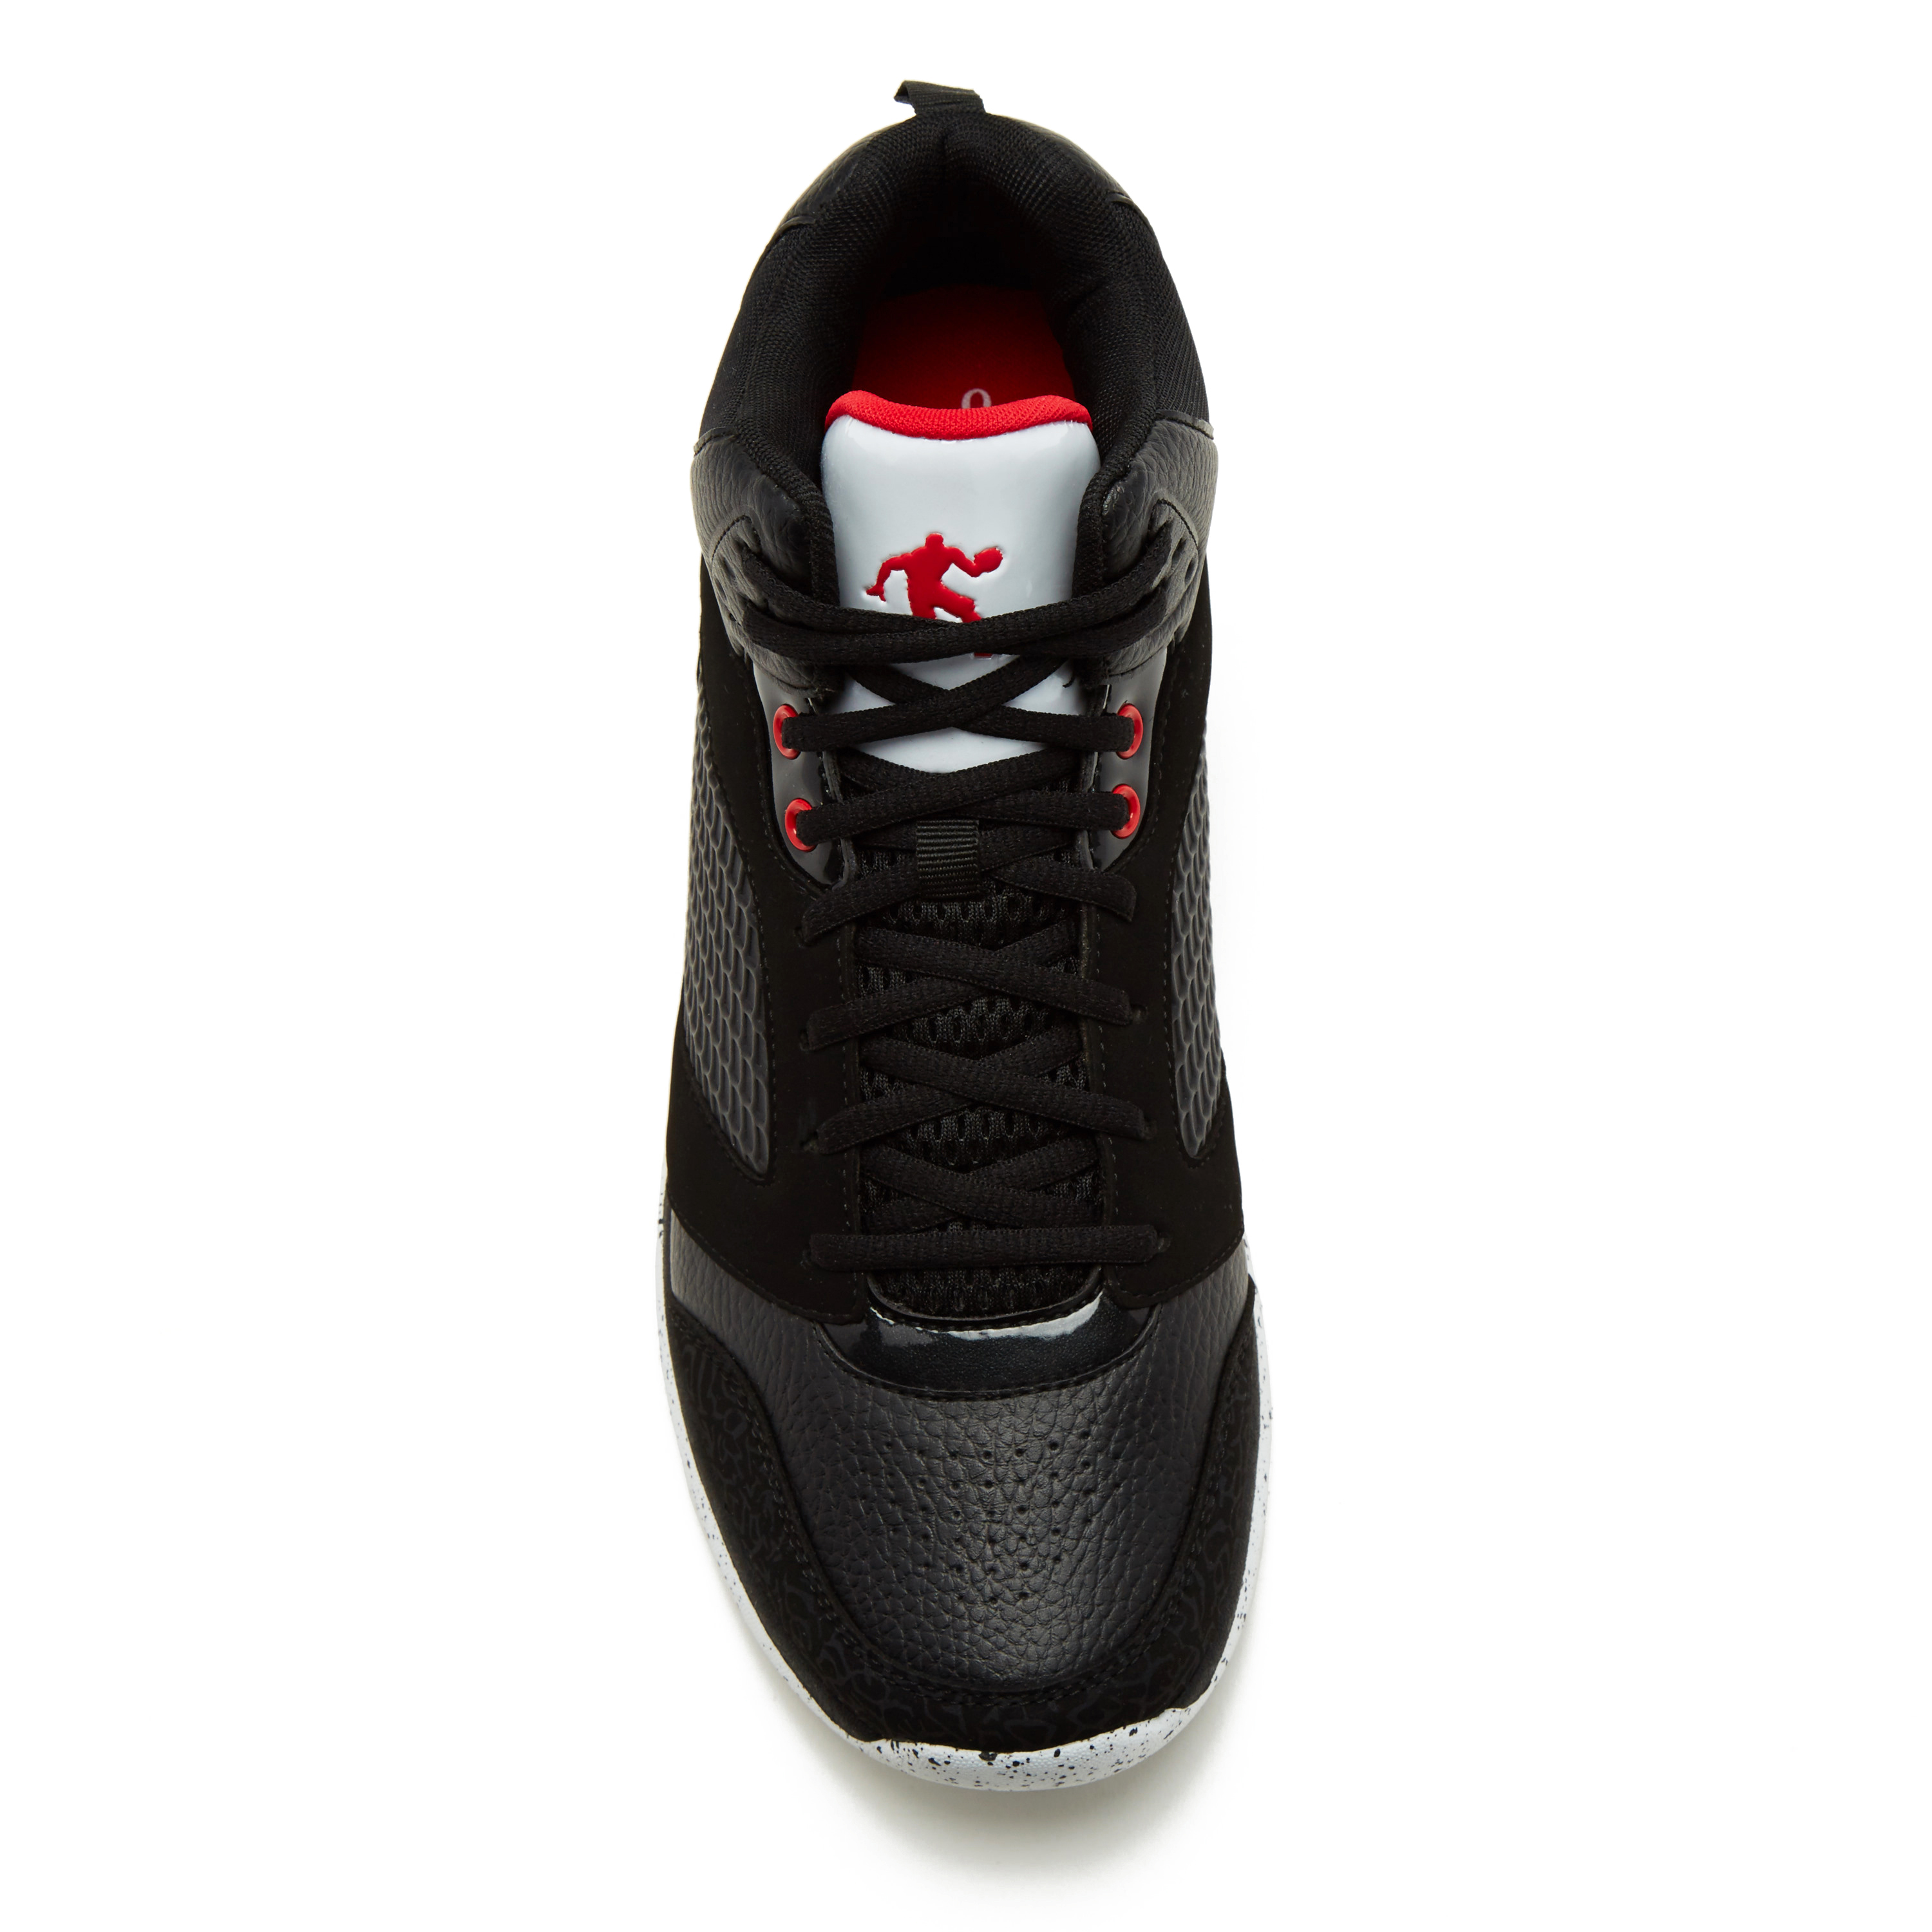 AND1 Men's Capital 2.0 Athletic Shoe - image 3 of 5